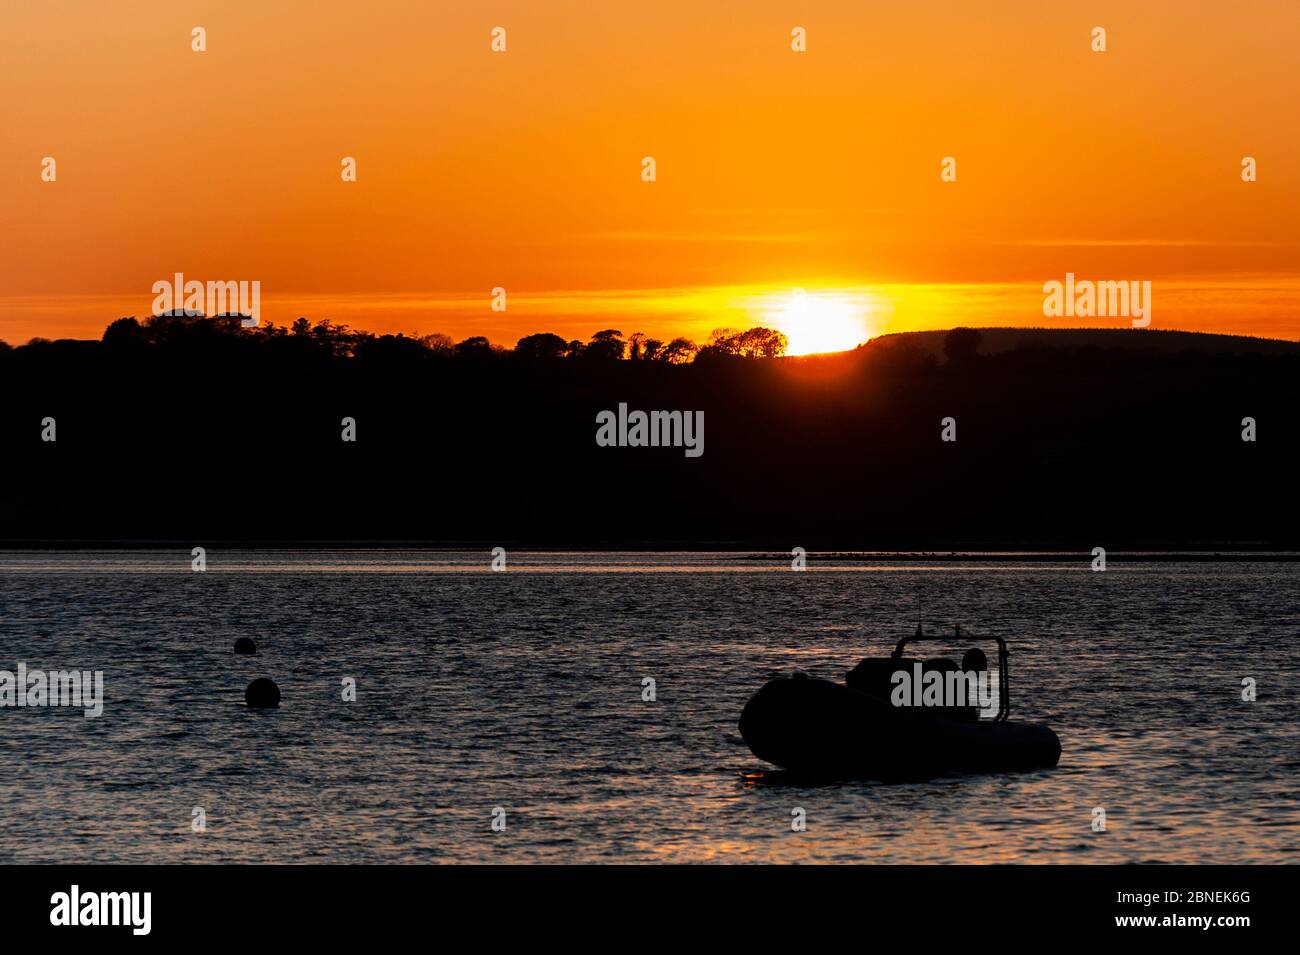 Courtmacsherry, West Cork, Ireland. 14th May, 2020. The sun sets spectacularly over Courtmacsherry Marina after a day of sunshine. Credit: AG News/Alamy Live News Stock Photo